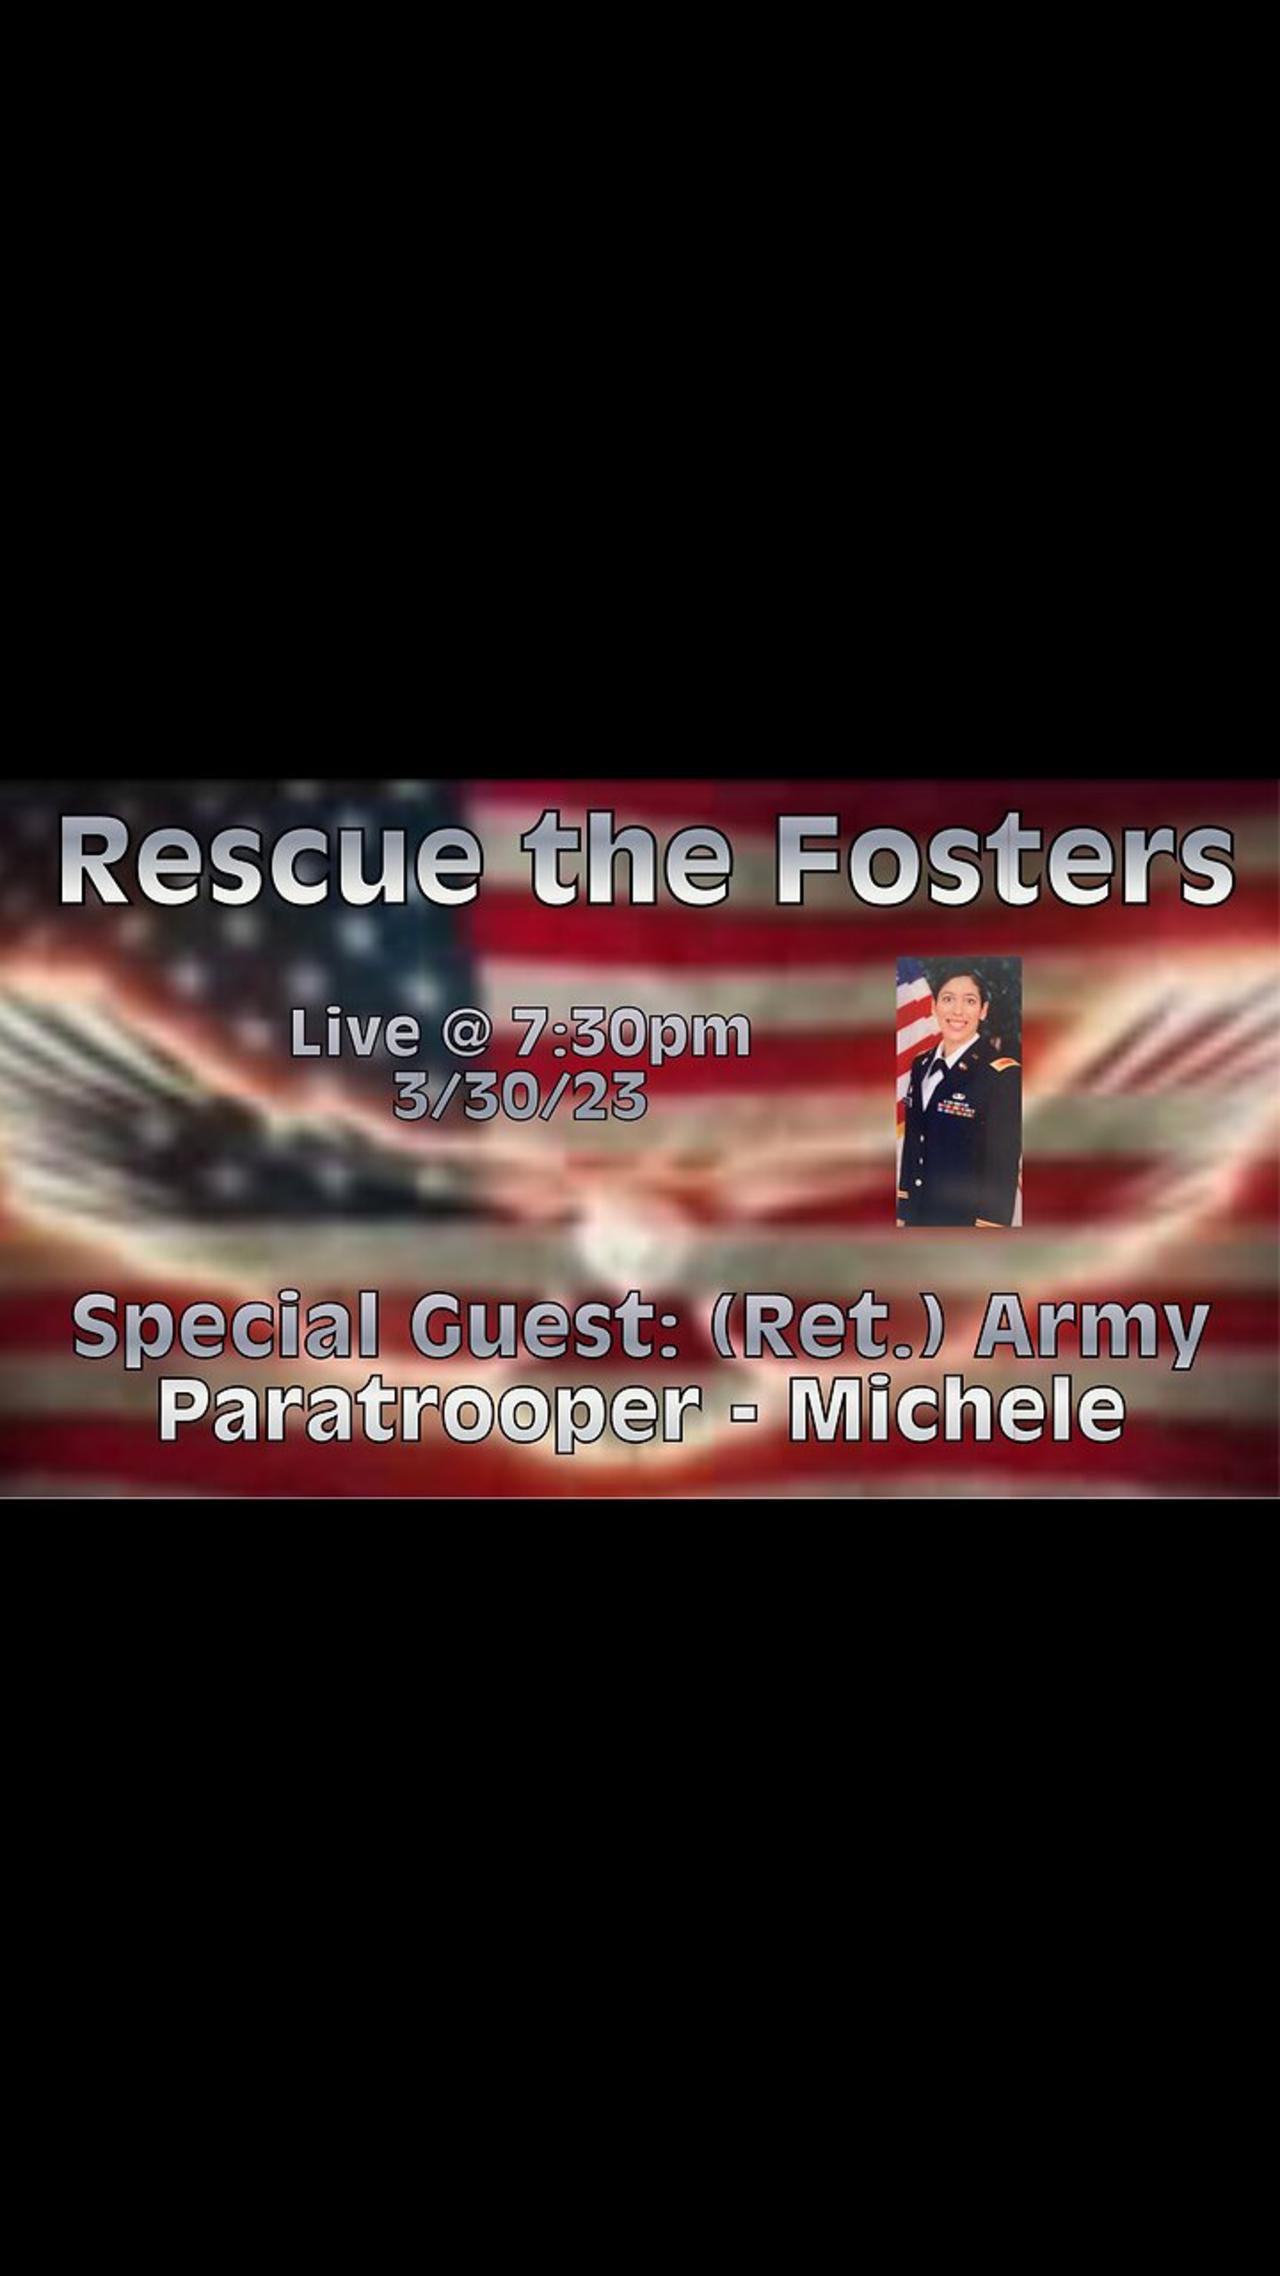 Rescue the Fosters w/ Special Guest: (Ret.) Army Paratrooper - Michele